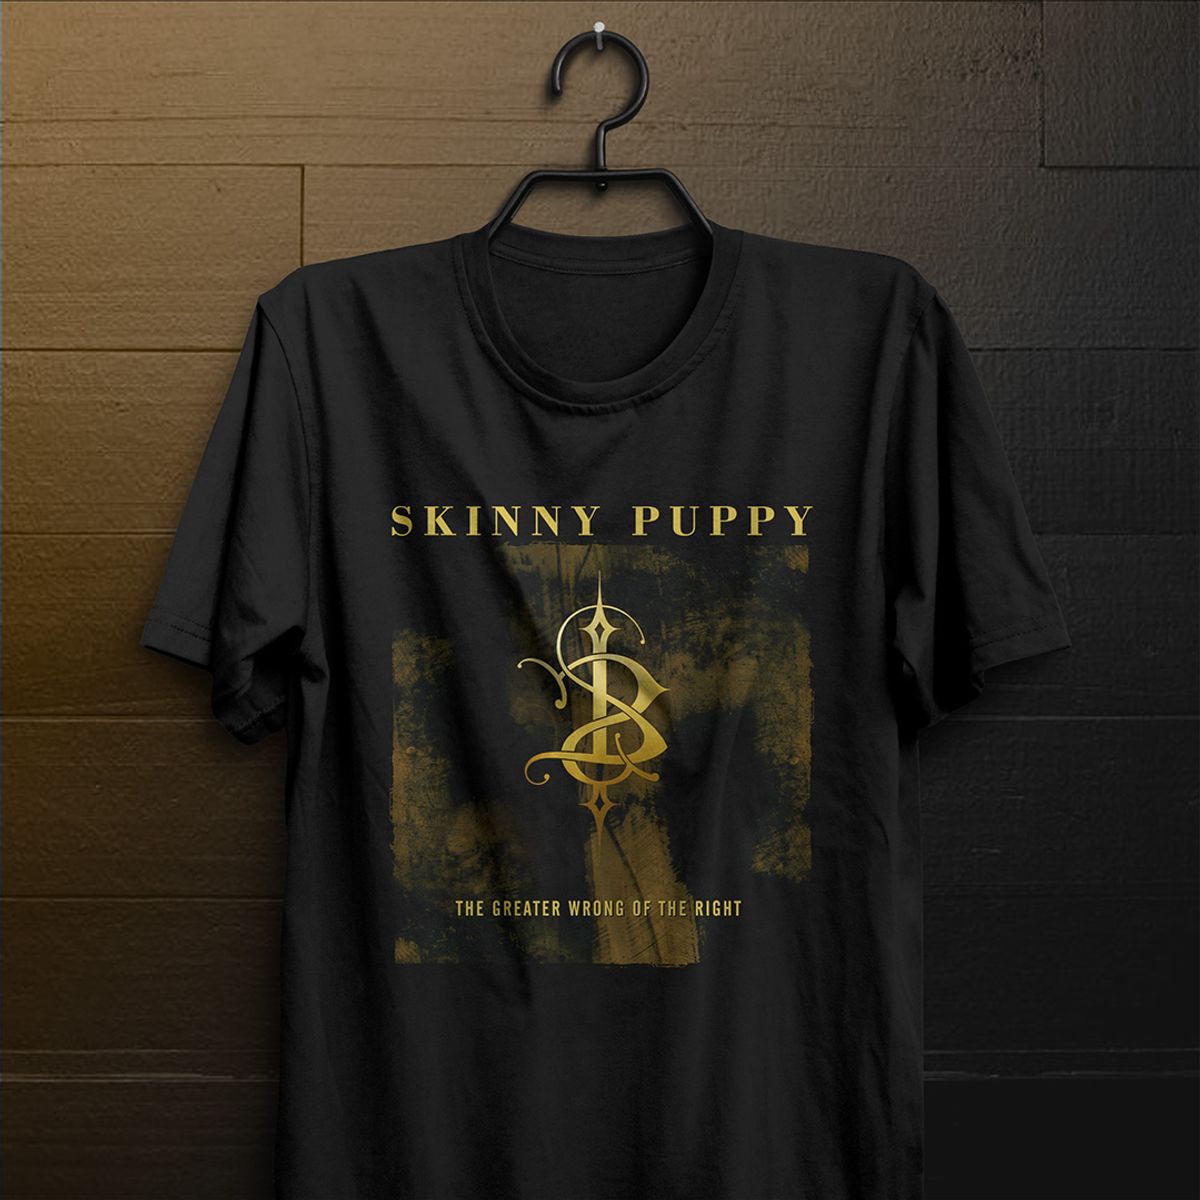 Nome do produto: Camiseta Skinny Puppy - The Greater Wrong Of The Right